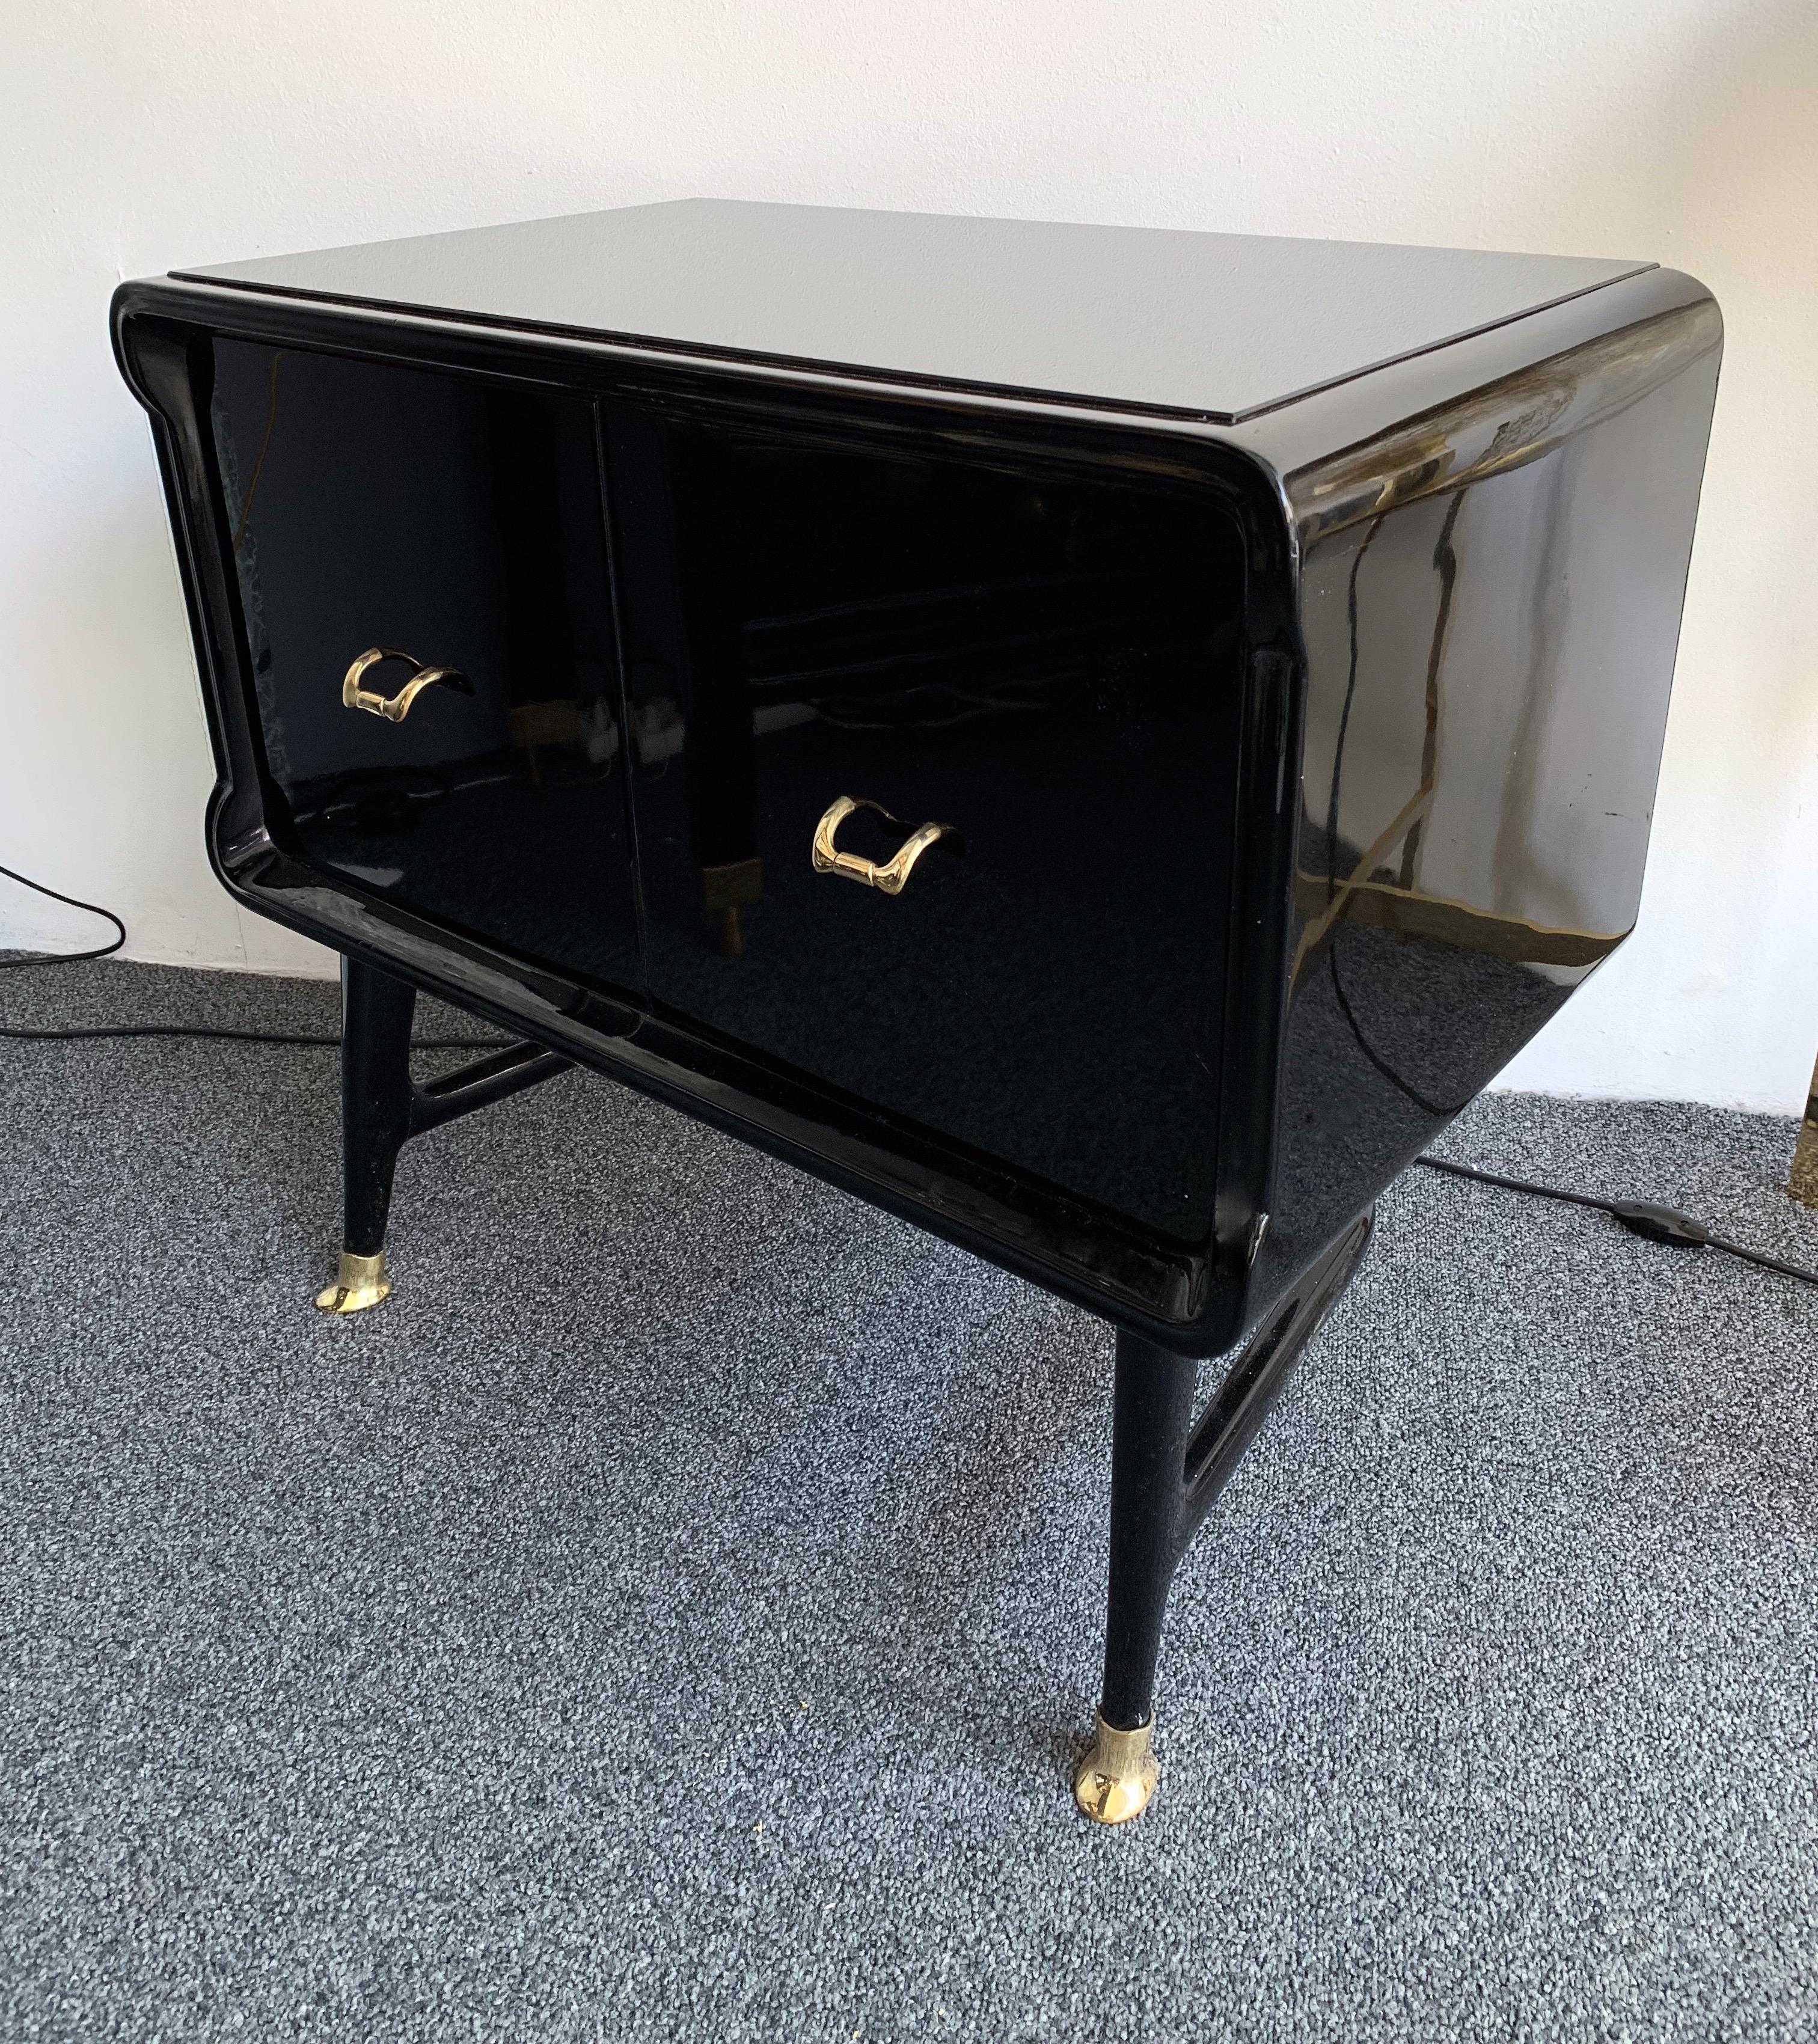 Pair of black lacquered wood nightstands, side end low tables, brass feet and handle, typical feet by the Italian designer Vittorio Dassi. Black opaline glass top. also available the sideboard buffet credenza or large commode chest of drawers.